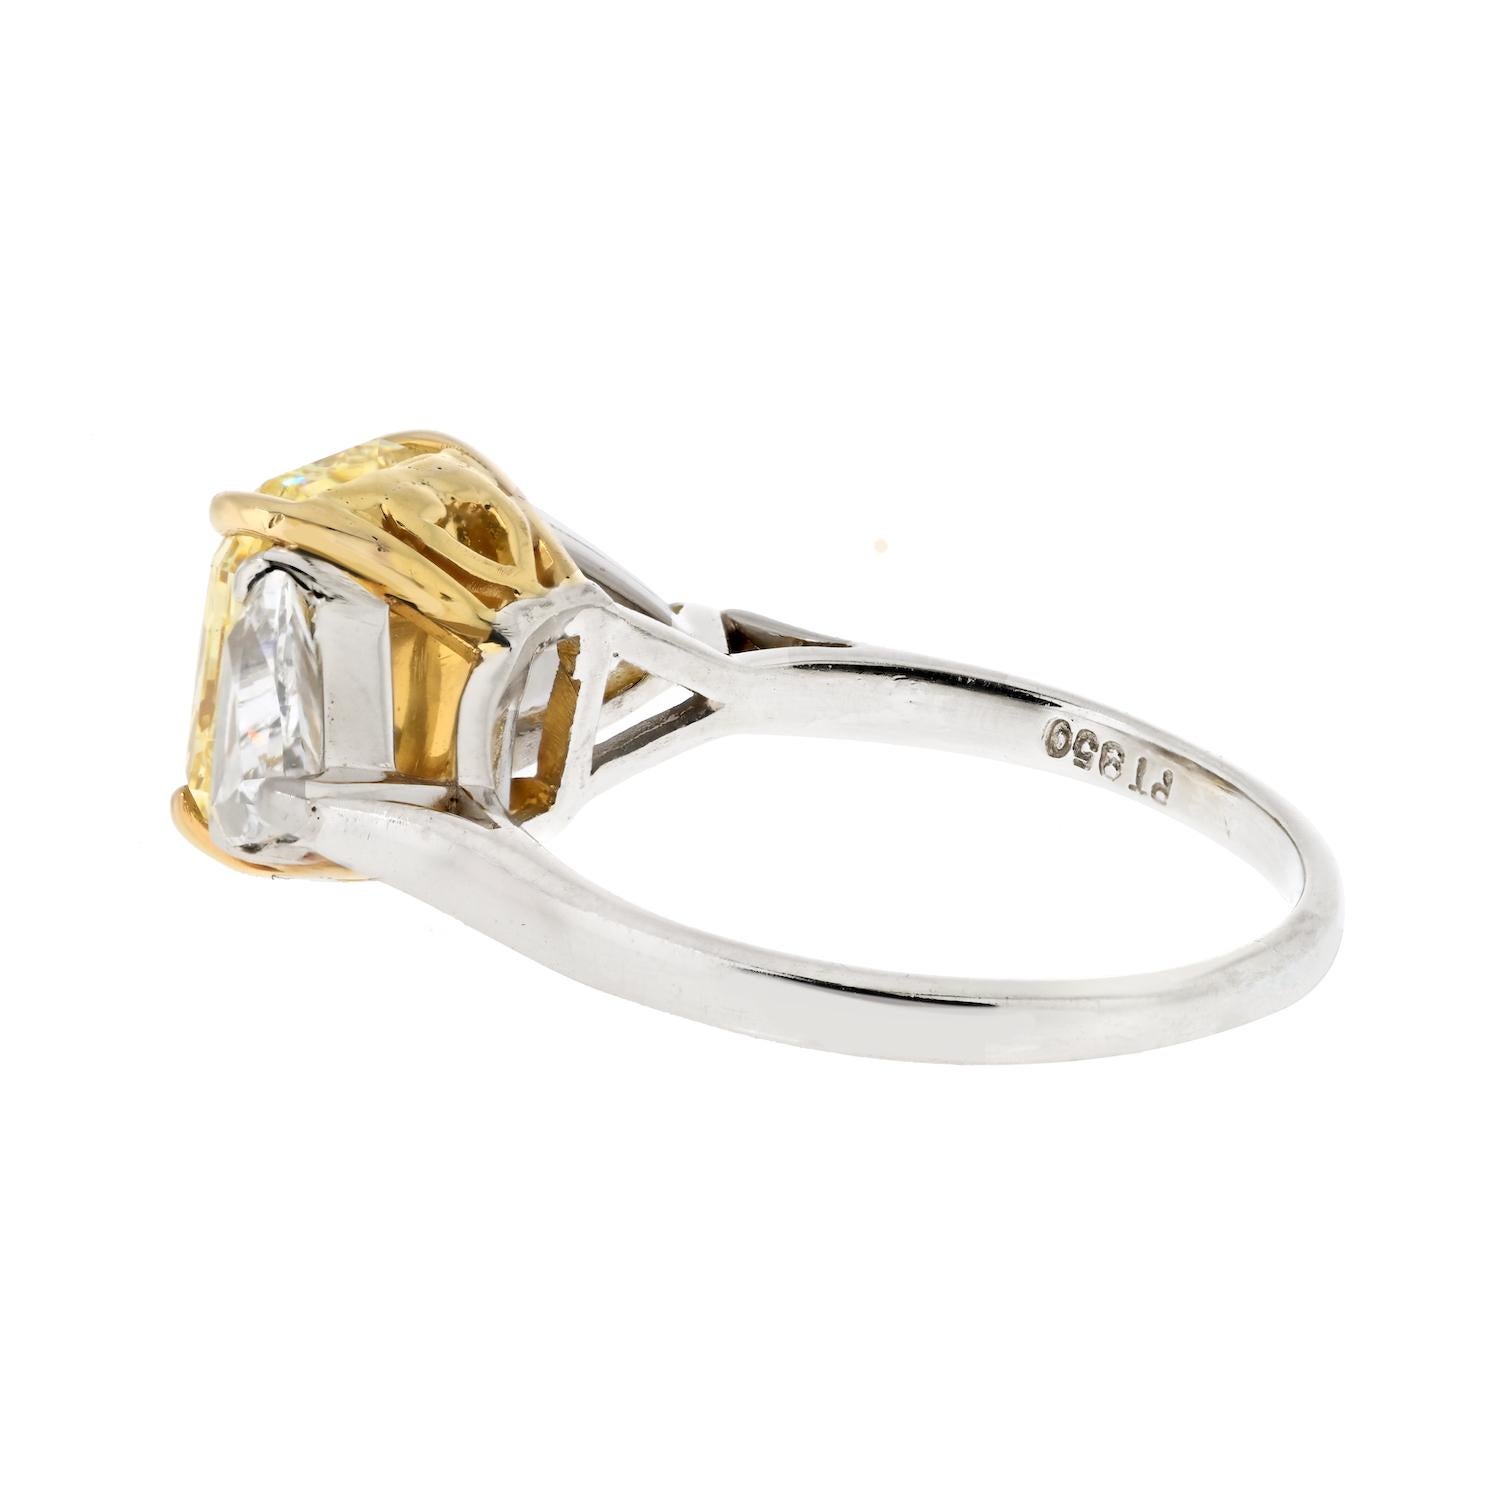 3.08ct Radiant Cut Fancy Yellow VVS2 GIA Diamond Engagement Ring In Excellent Condition For Sale In New York, NY